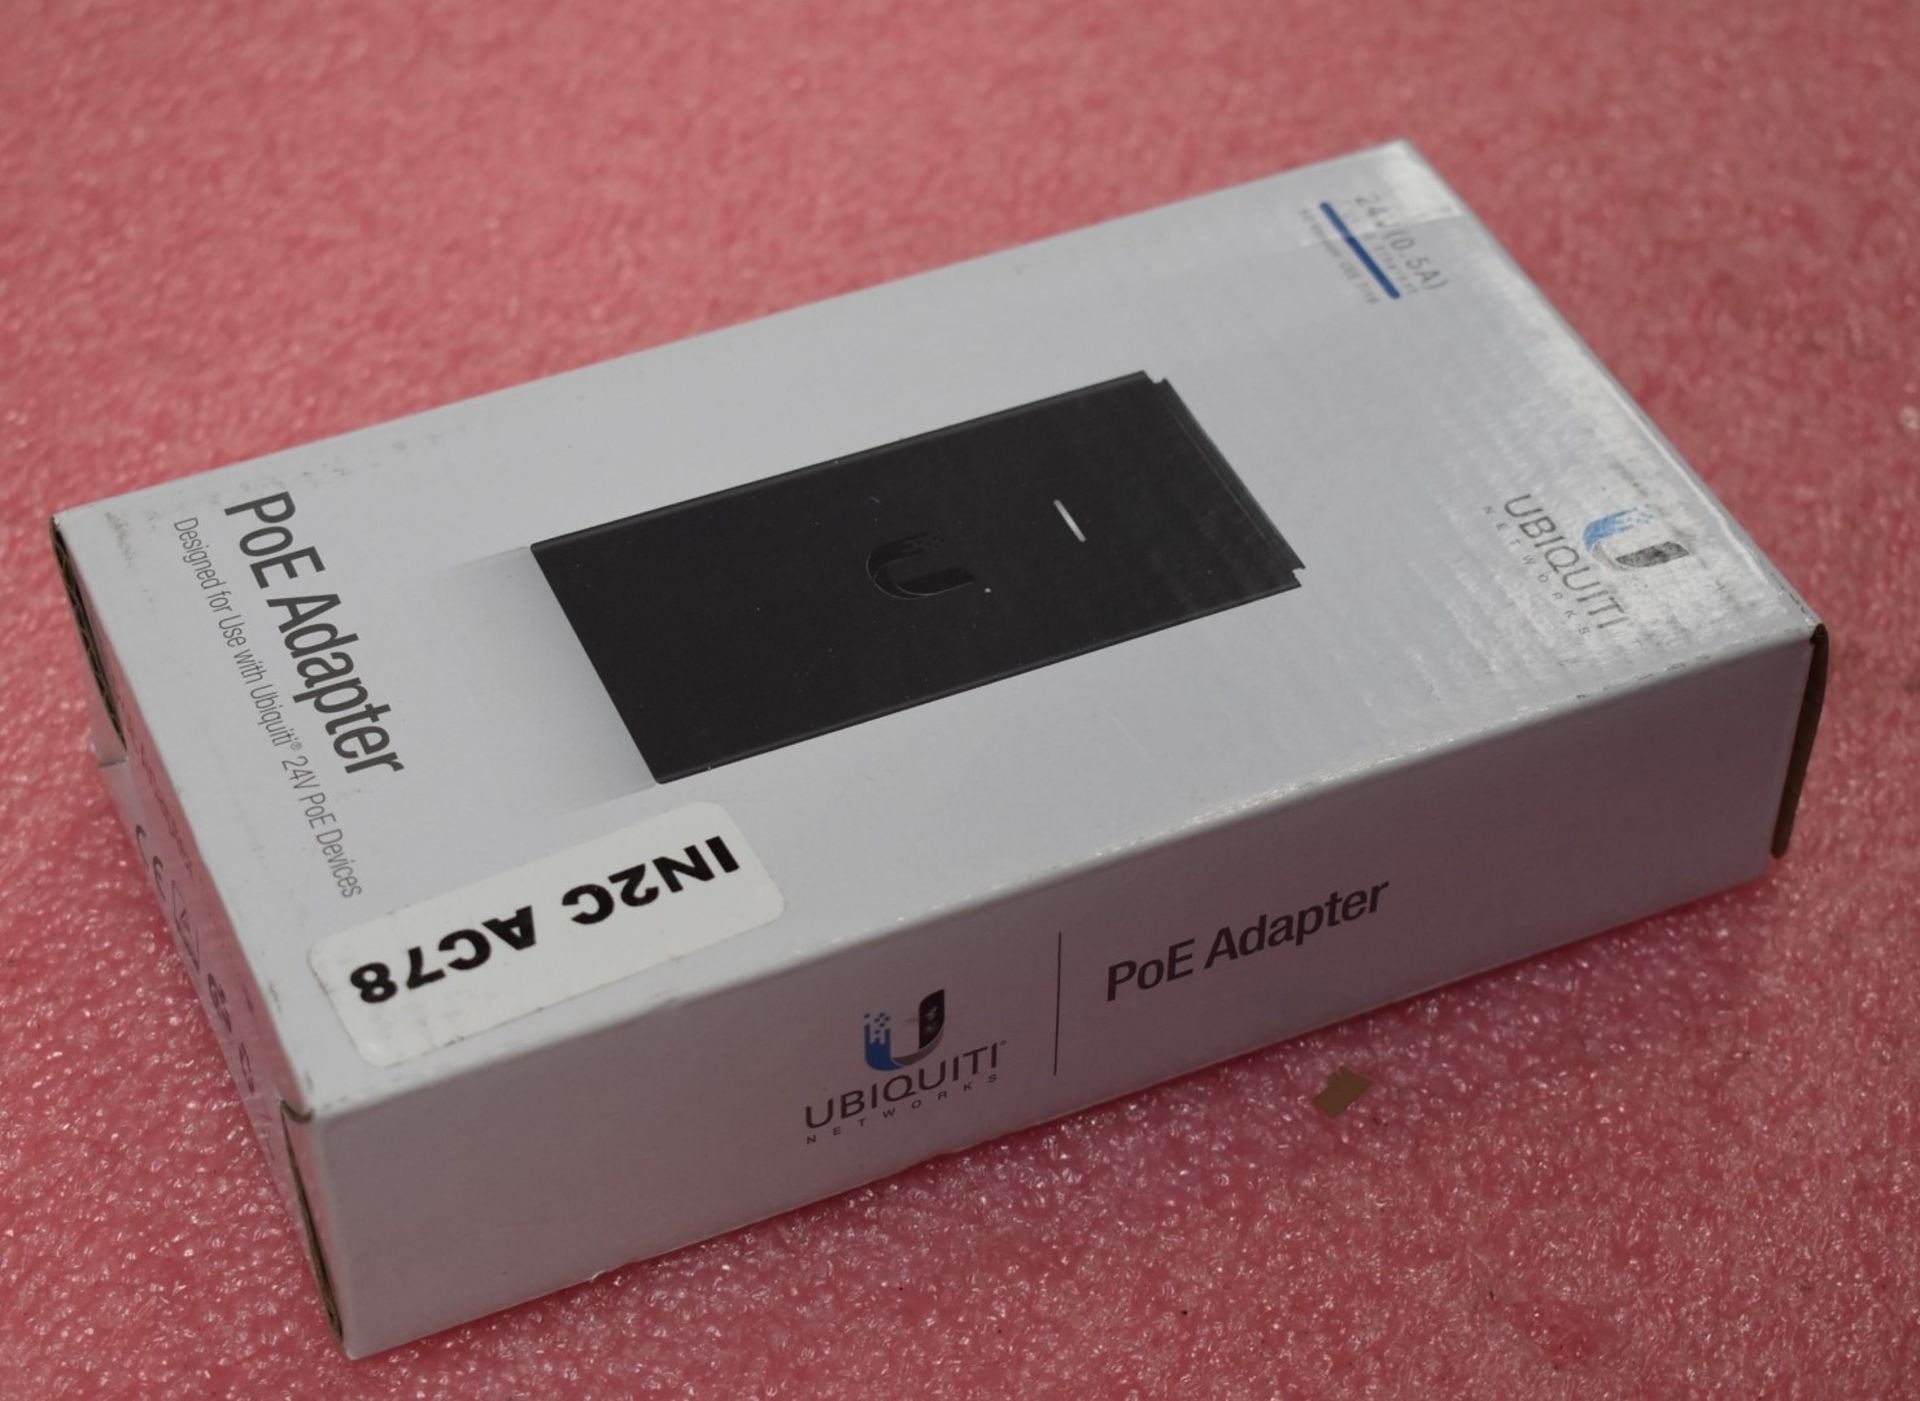 1 x Ubiquiti Gigabit Passive Power Over Ethernet PoE Injector - 24V 0.5A - New Boxed Stock - Image 5 of 5